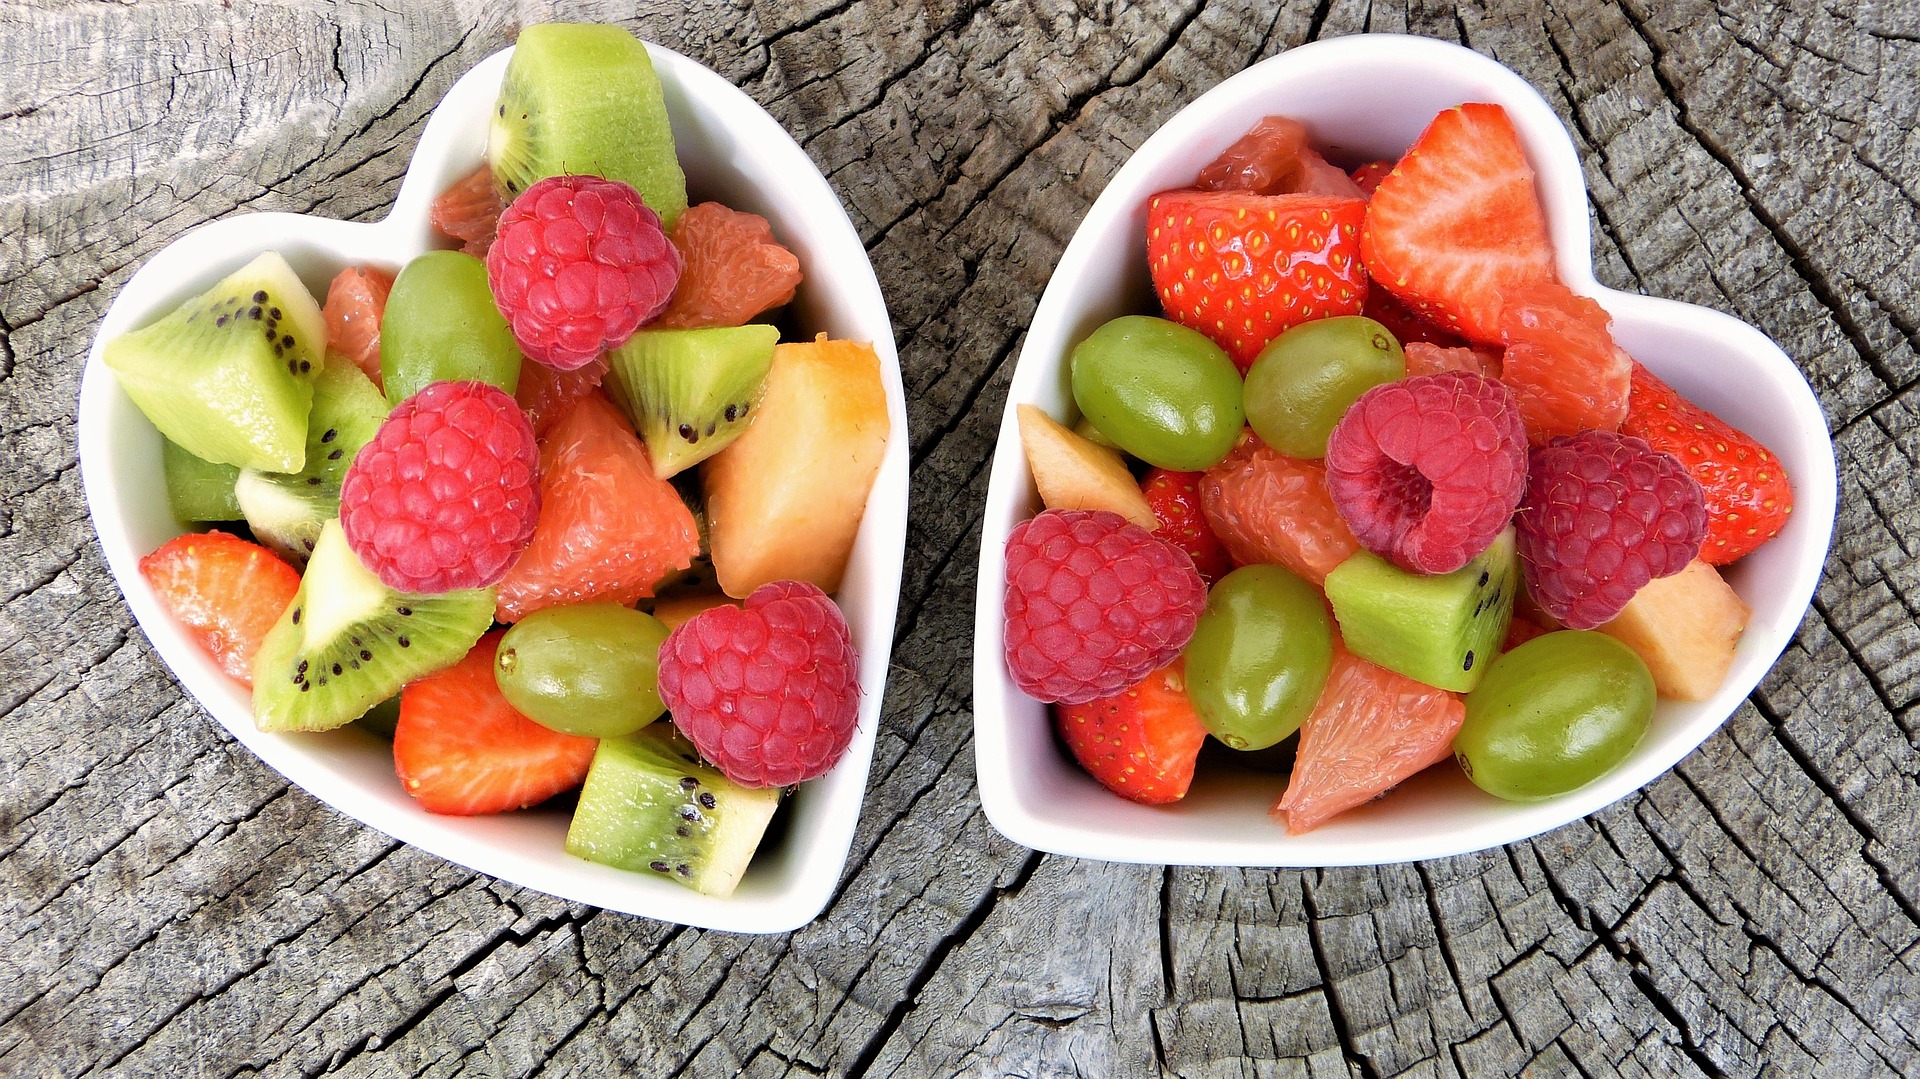 two fruit plates